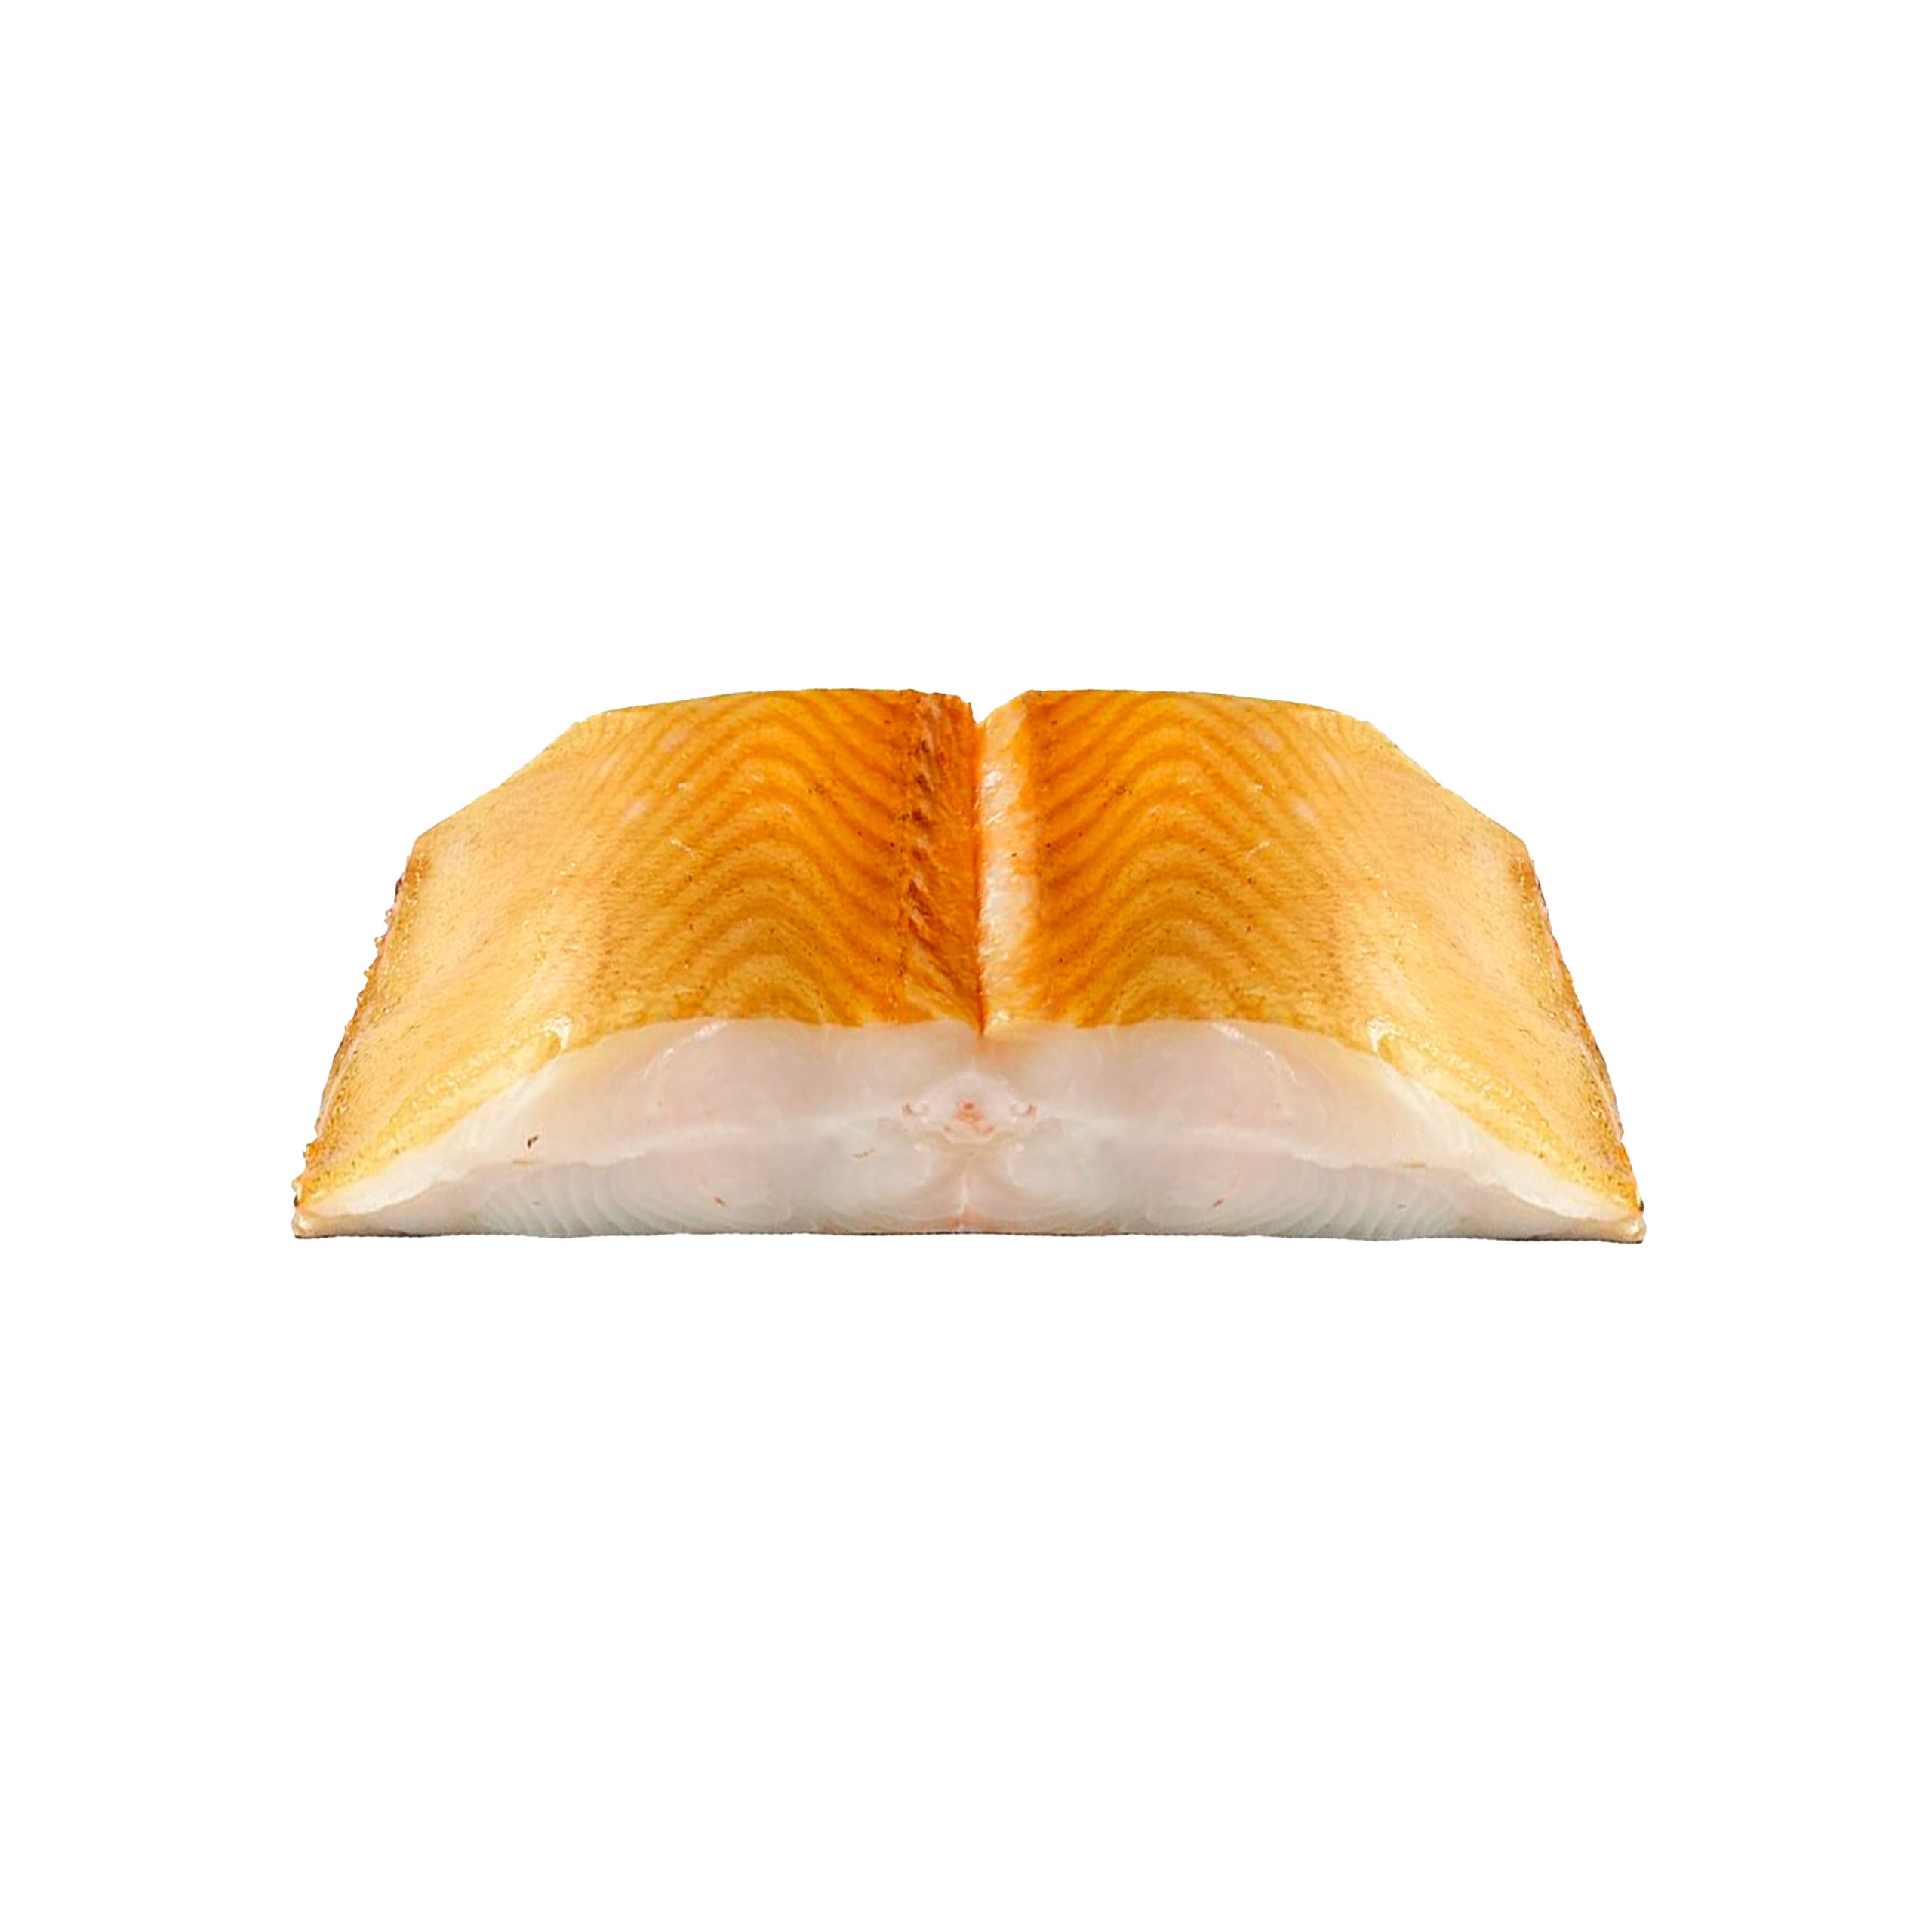 Cold Smoked Halibut fillet